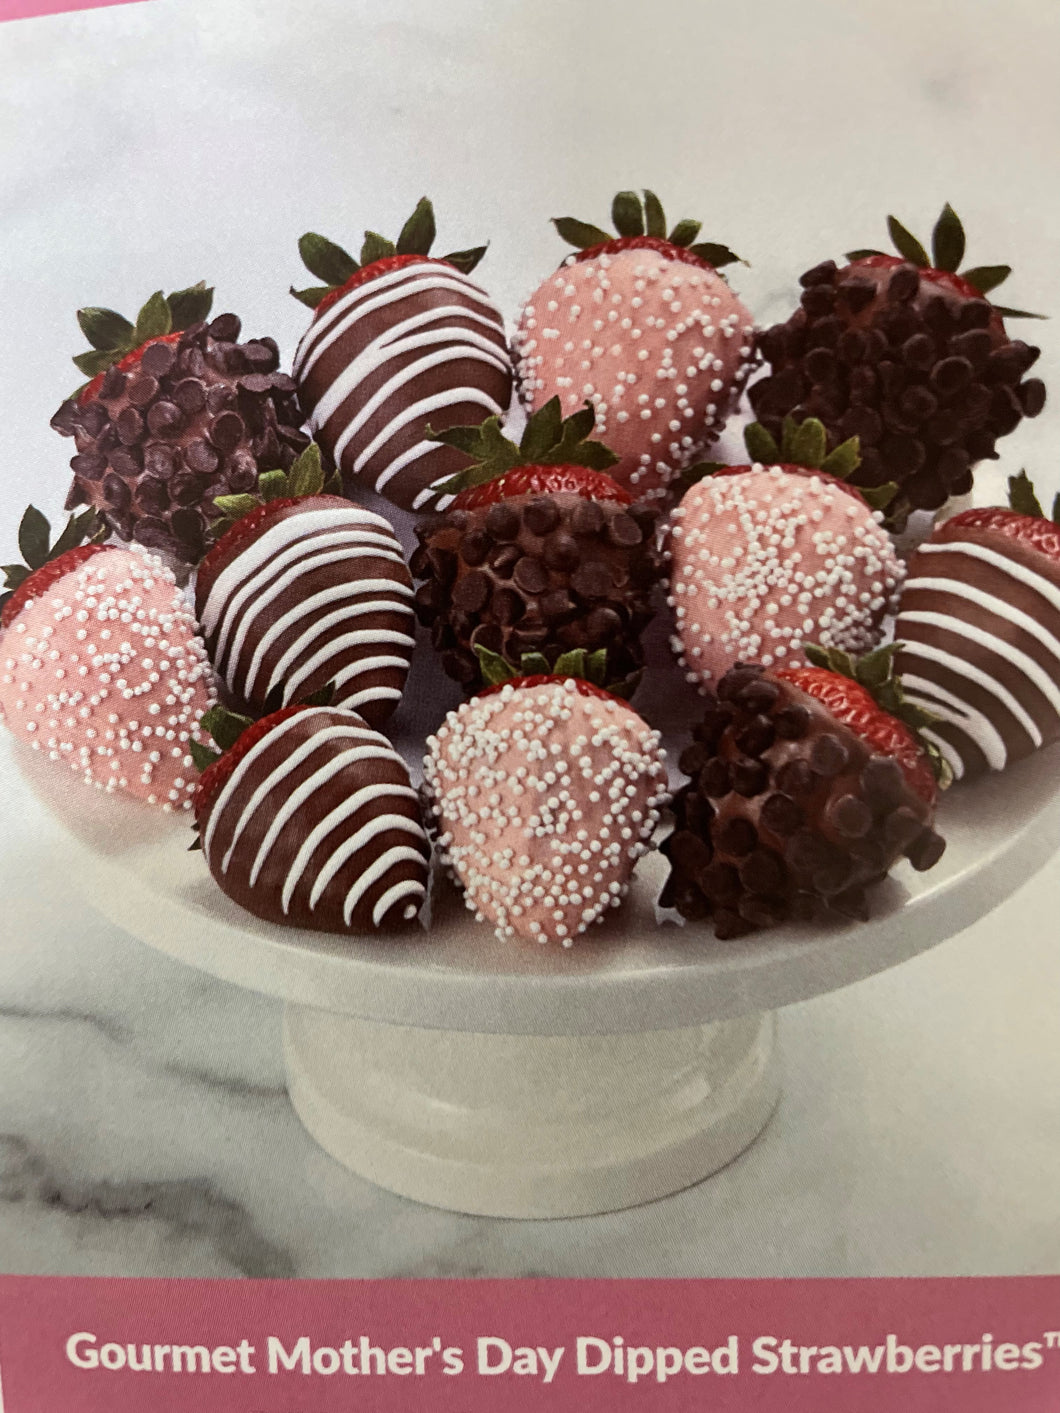 GOURMET MOTHER'S DAY DIPPED BERRIES